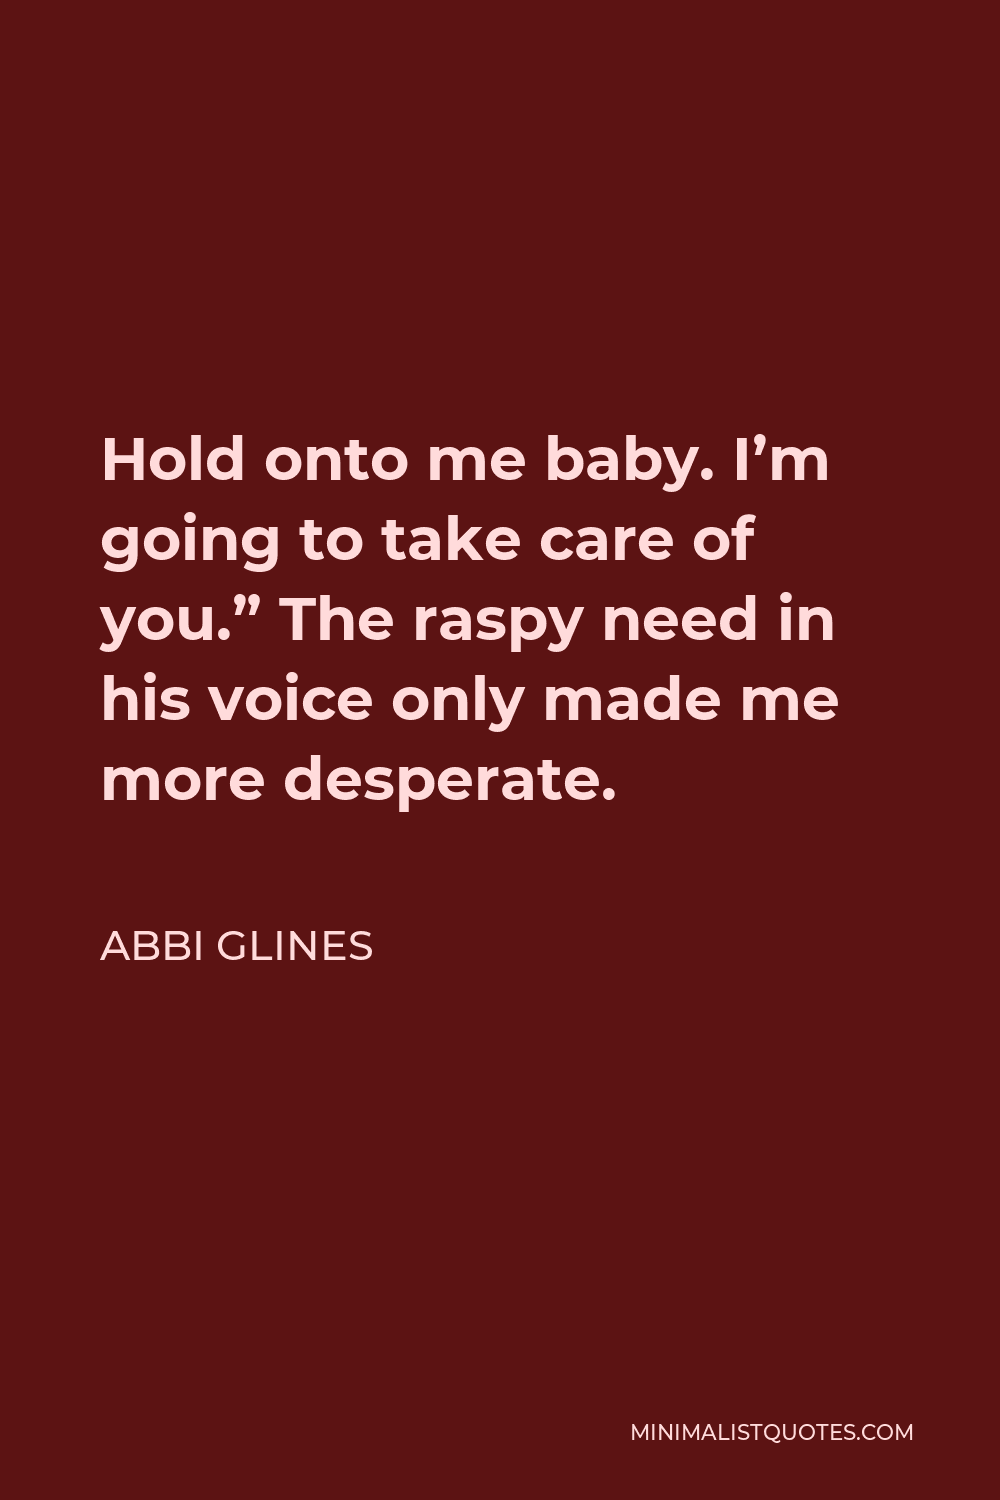 Abbi Glines Quote - Hold onto me baby. I’m going to take care of you.” The raspy need in his voice only made me more desperate.